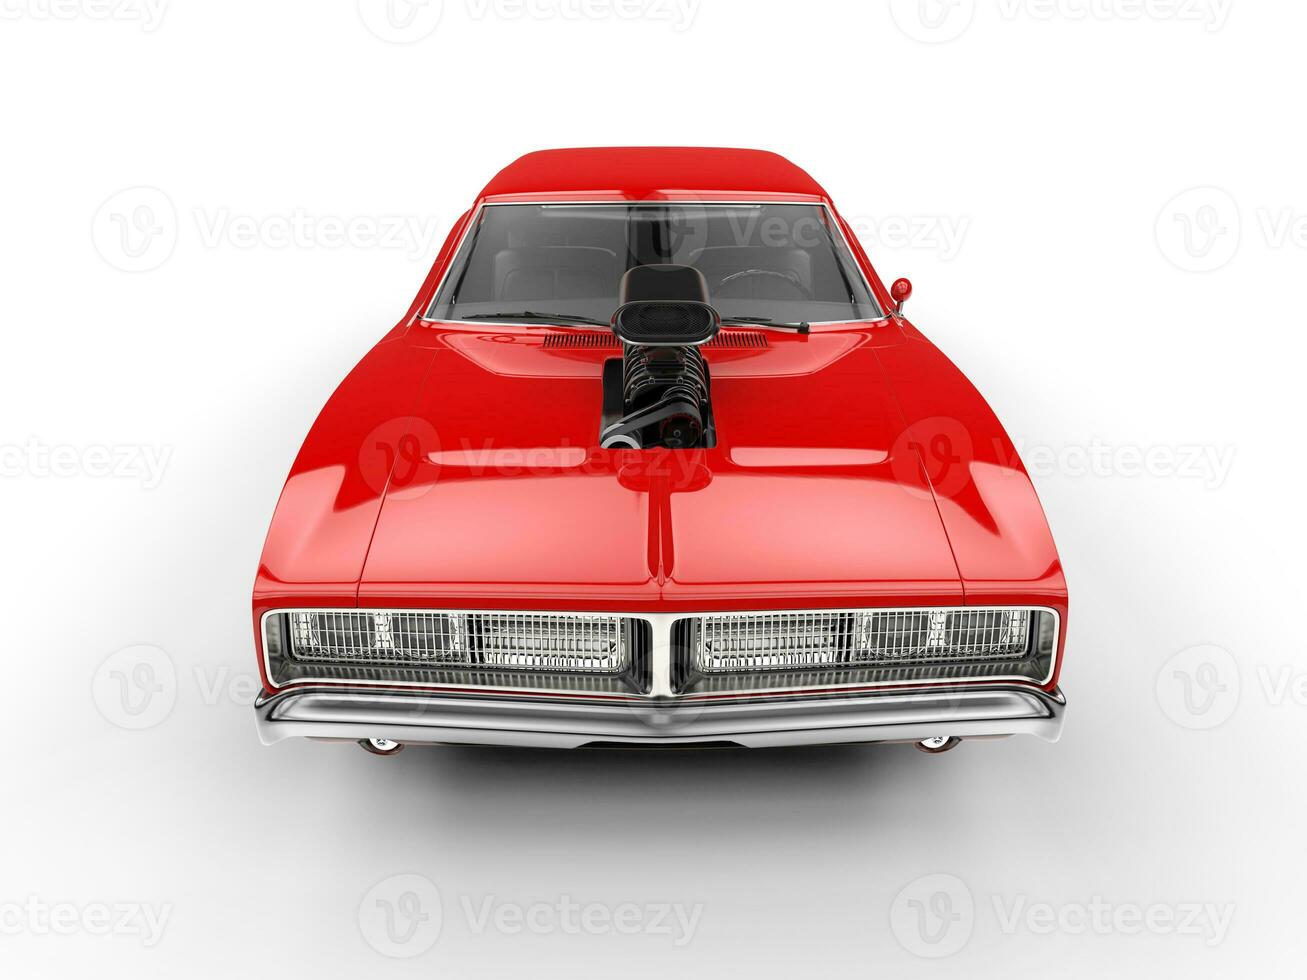 Awesome red muscle car - front top view closeup shot photo